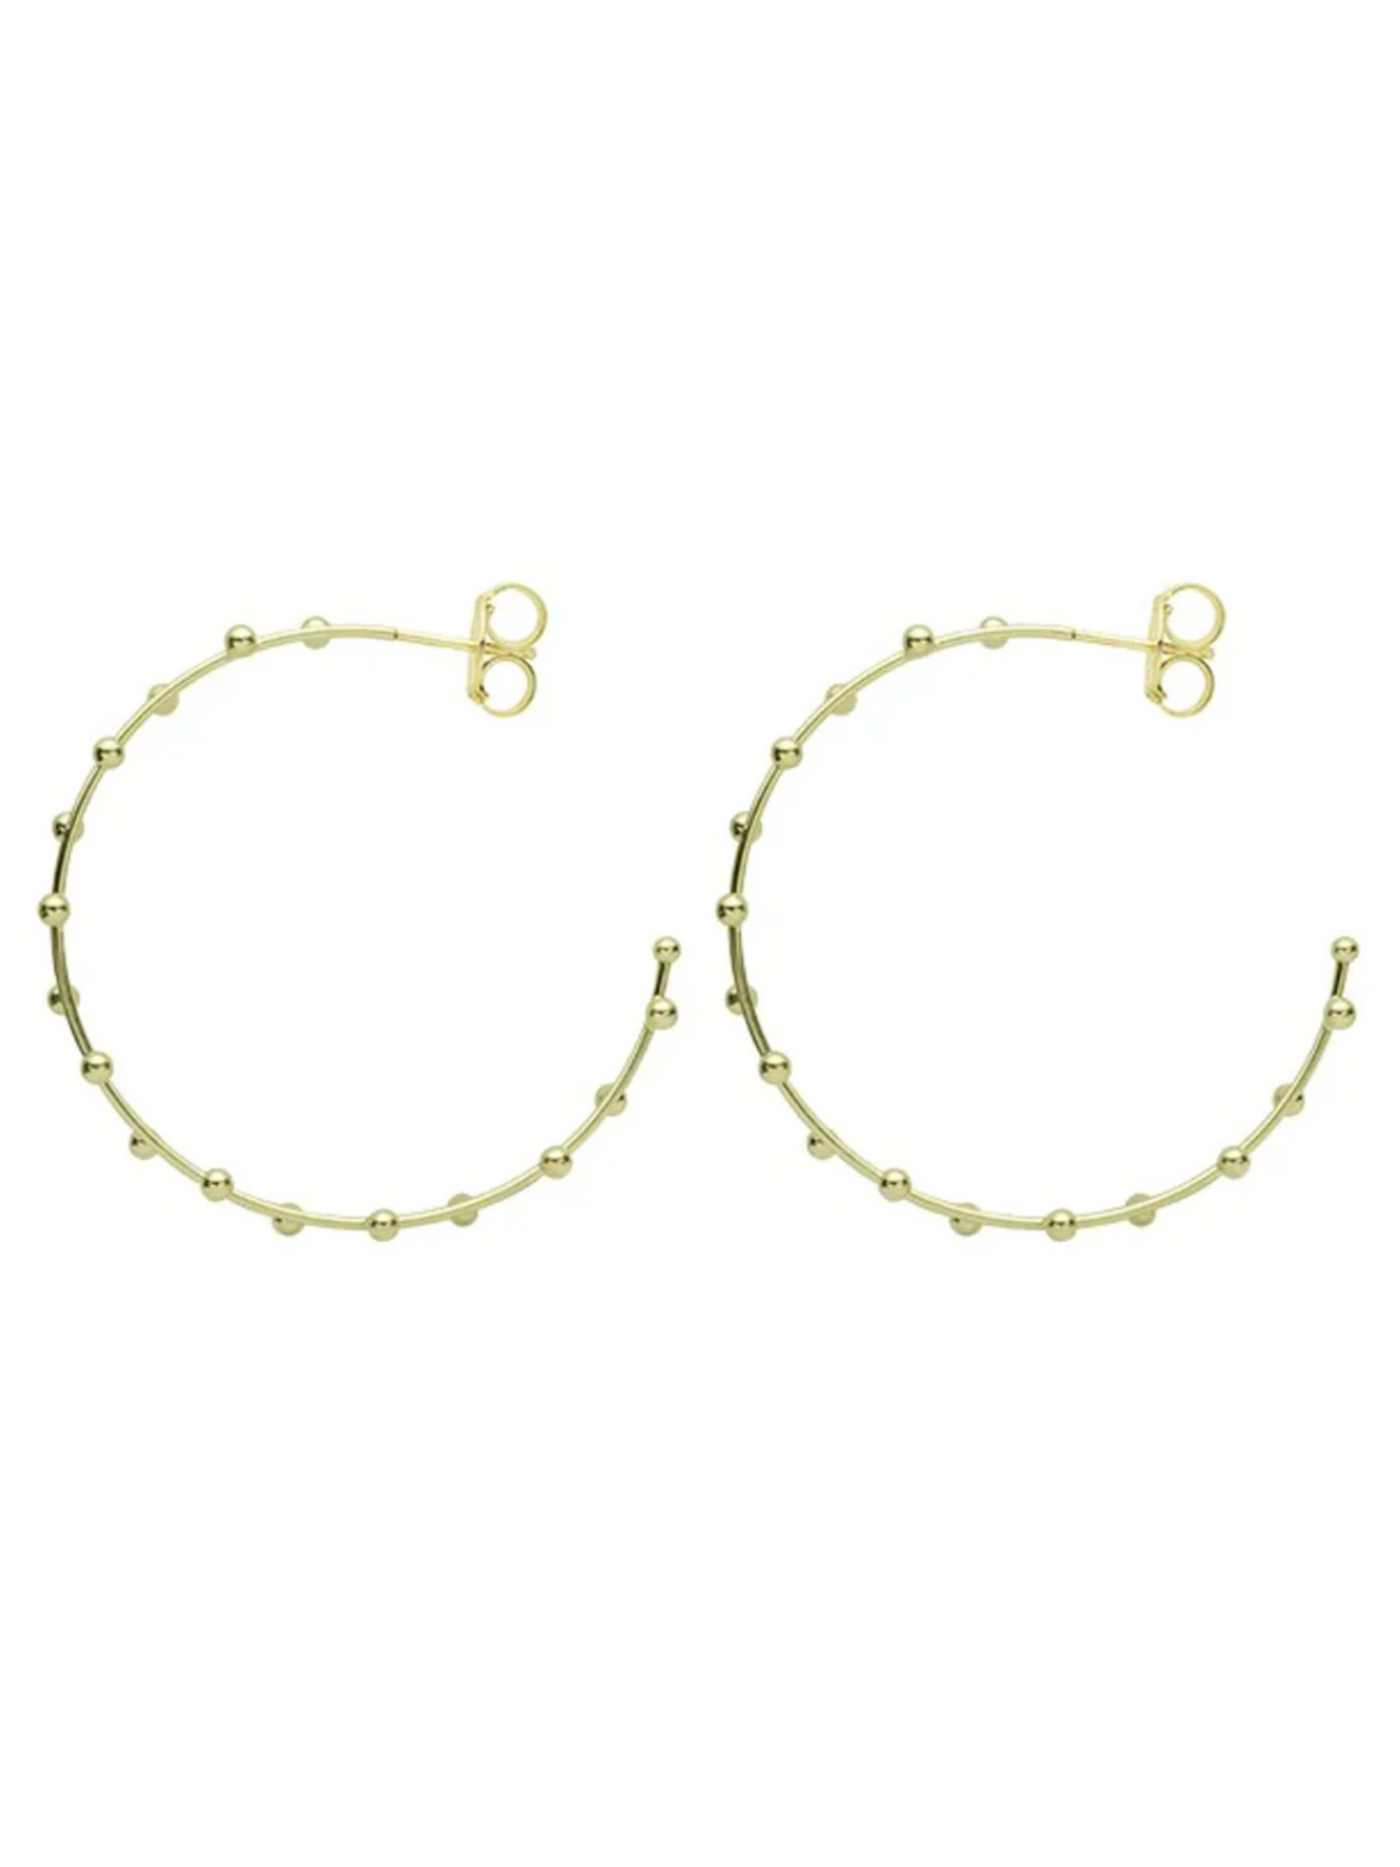 Shelia Fajl Thin Merry Go Round Beaded Hoops in shiny Gold on white background, side view.